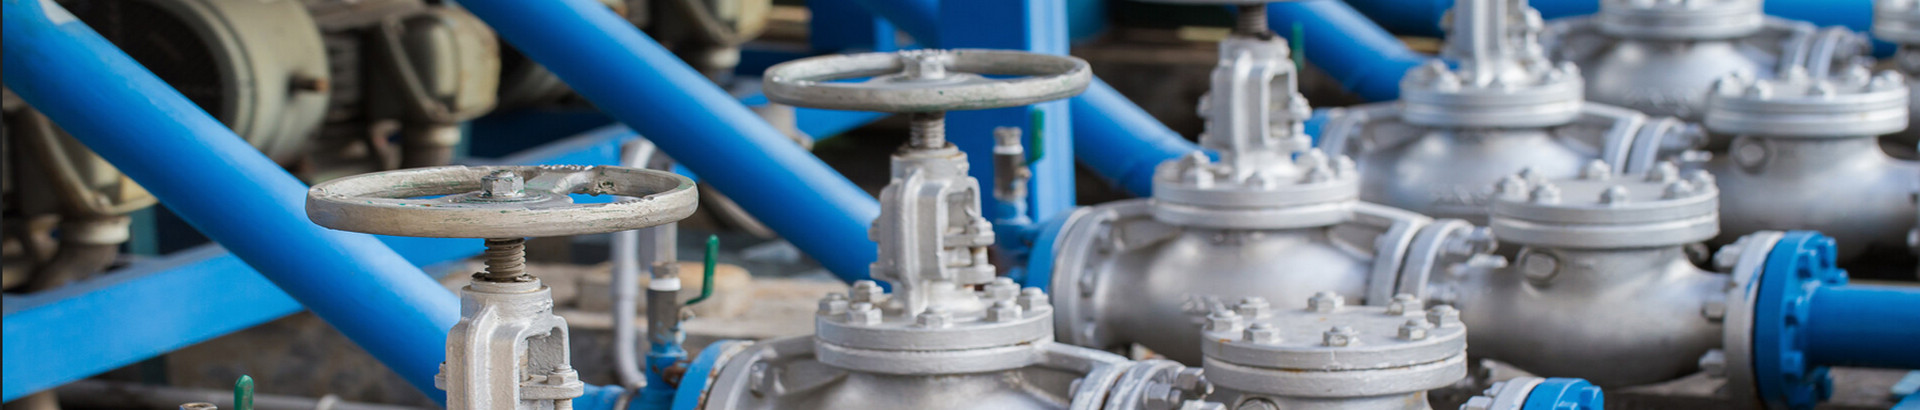 Do You Know About Valves?